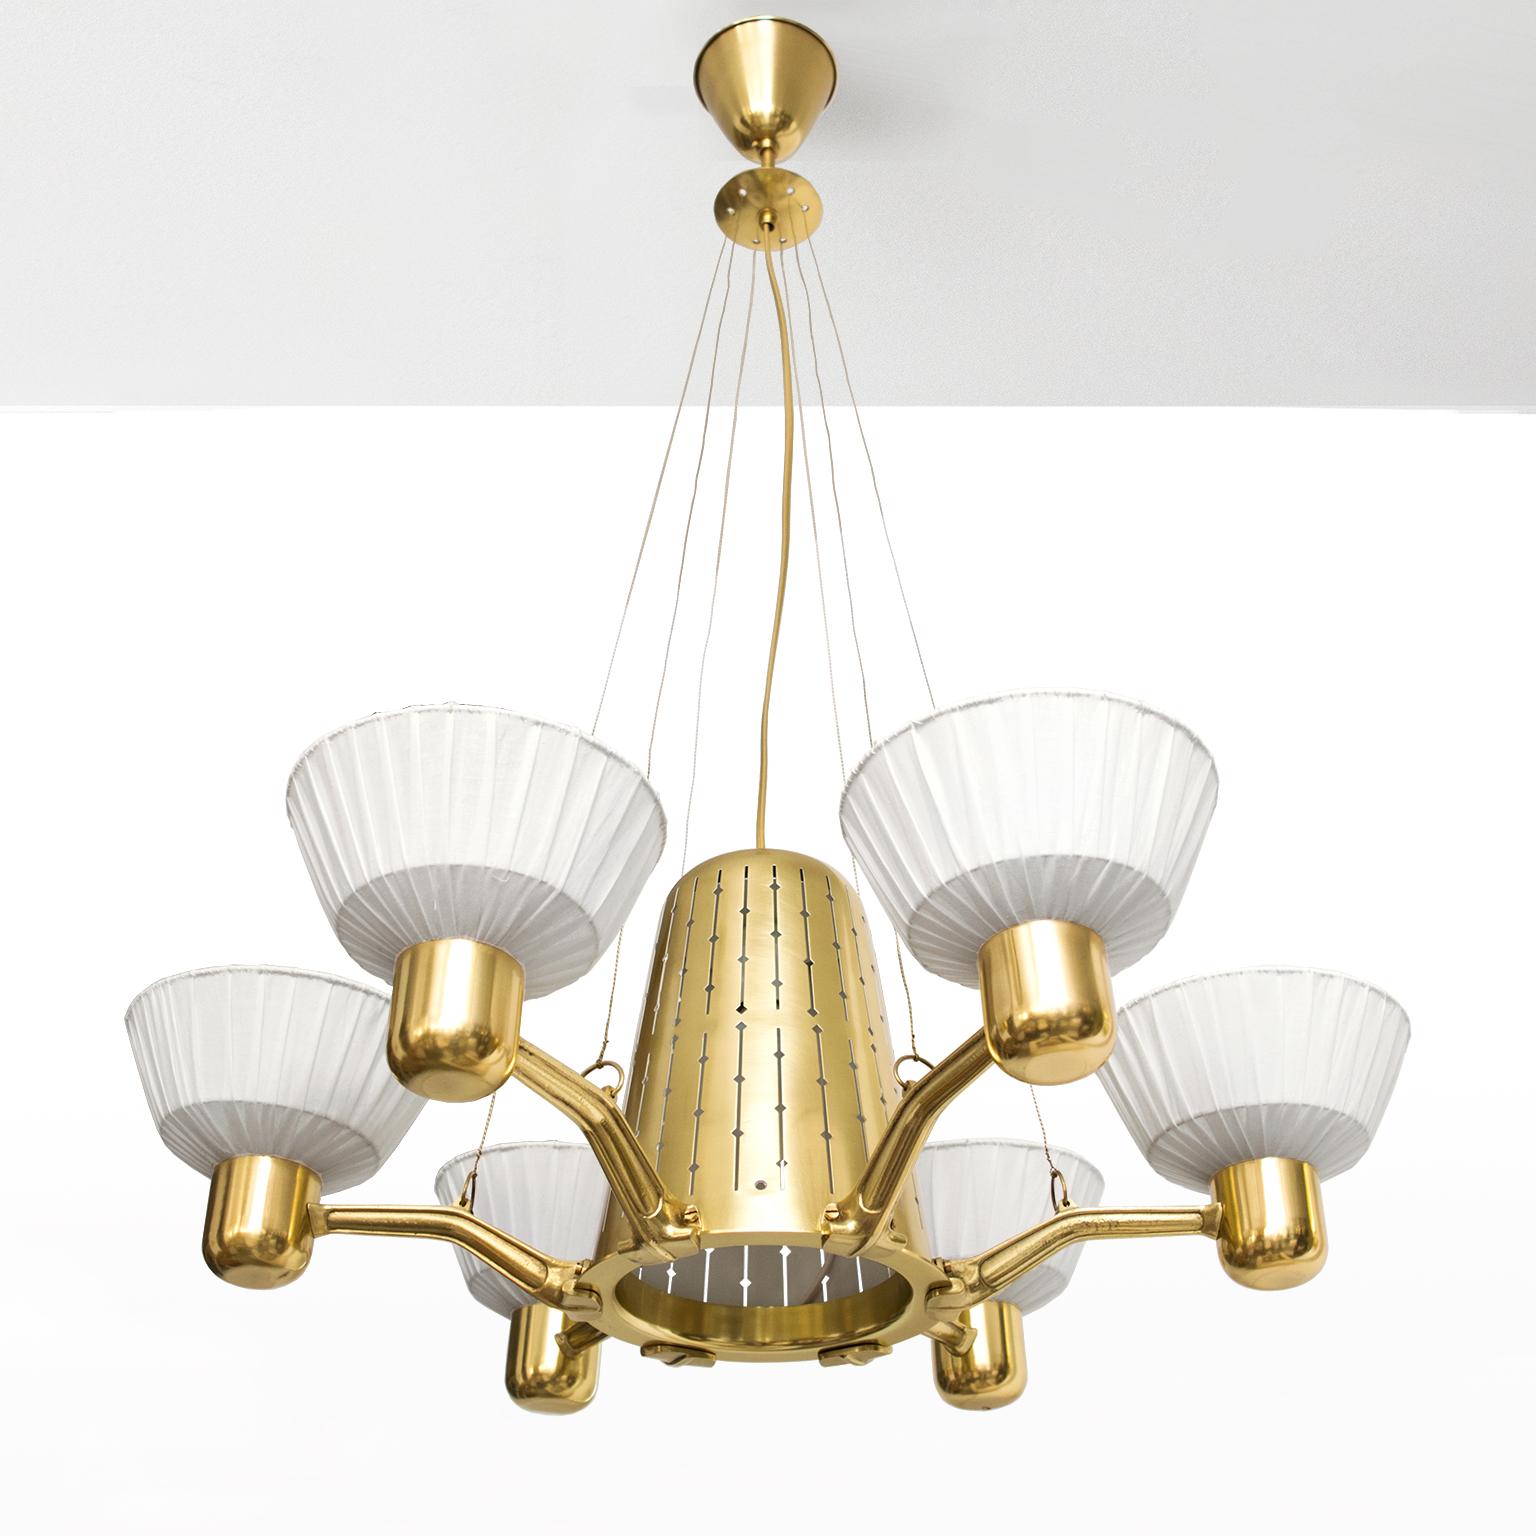 Hans Bergstrom, Scandinavian Modern six-arm chandelier in polished brass with newly restored fabric shades. The fixture’s dome centre form is detailed with a pierced vertical pattern. A single socket and bulb illuminate the centre domed body. Newly